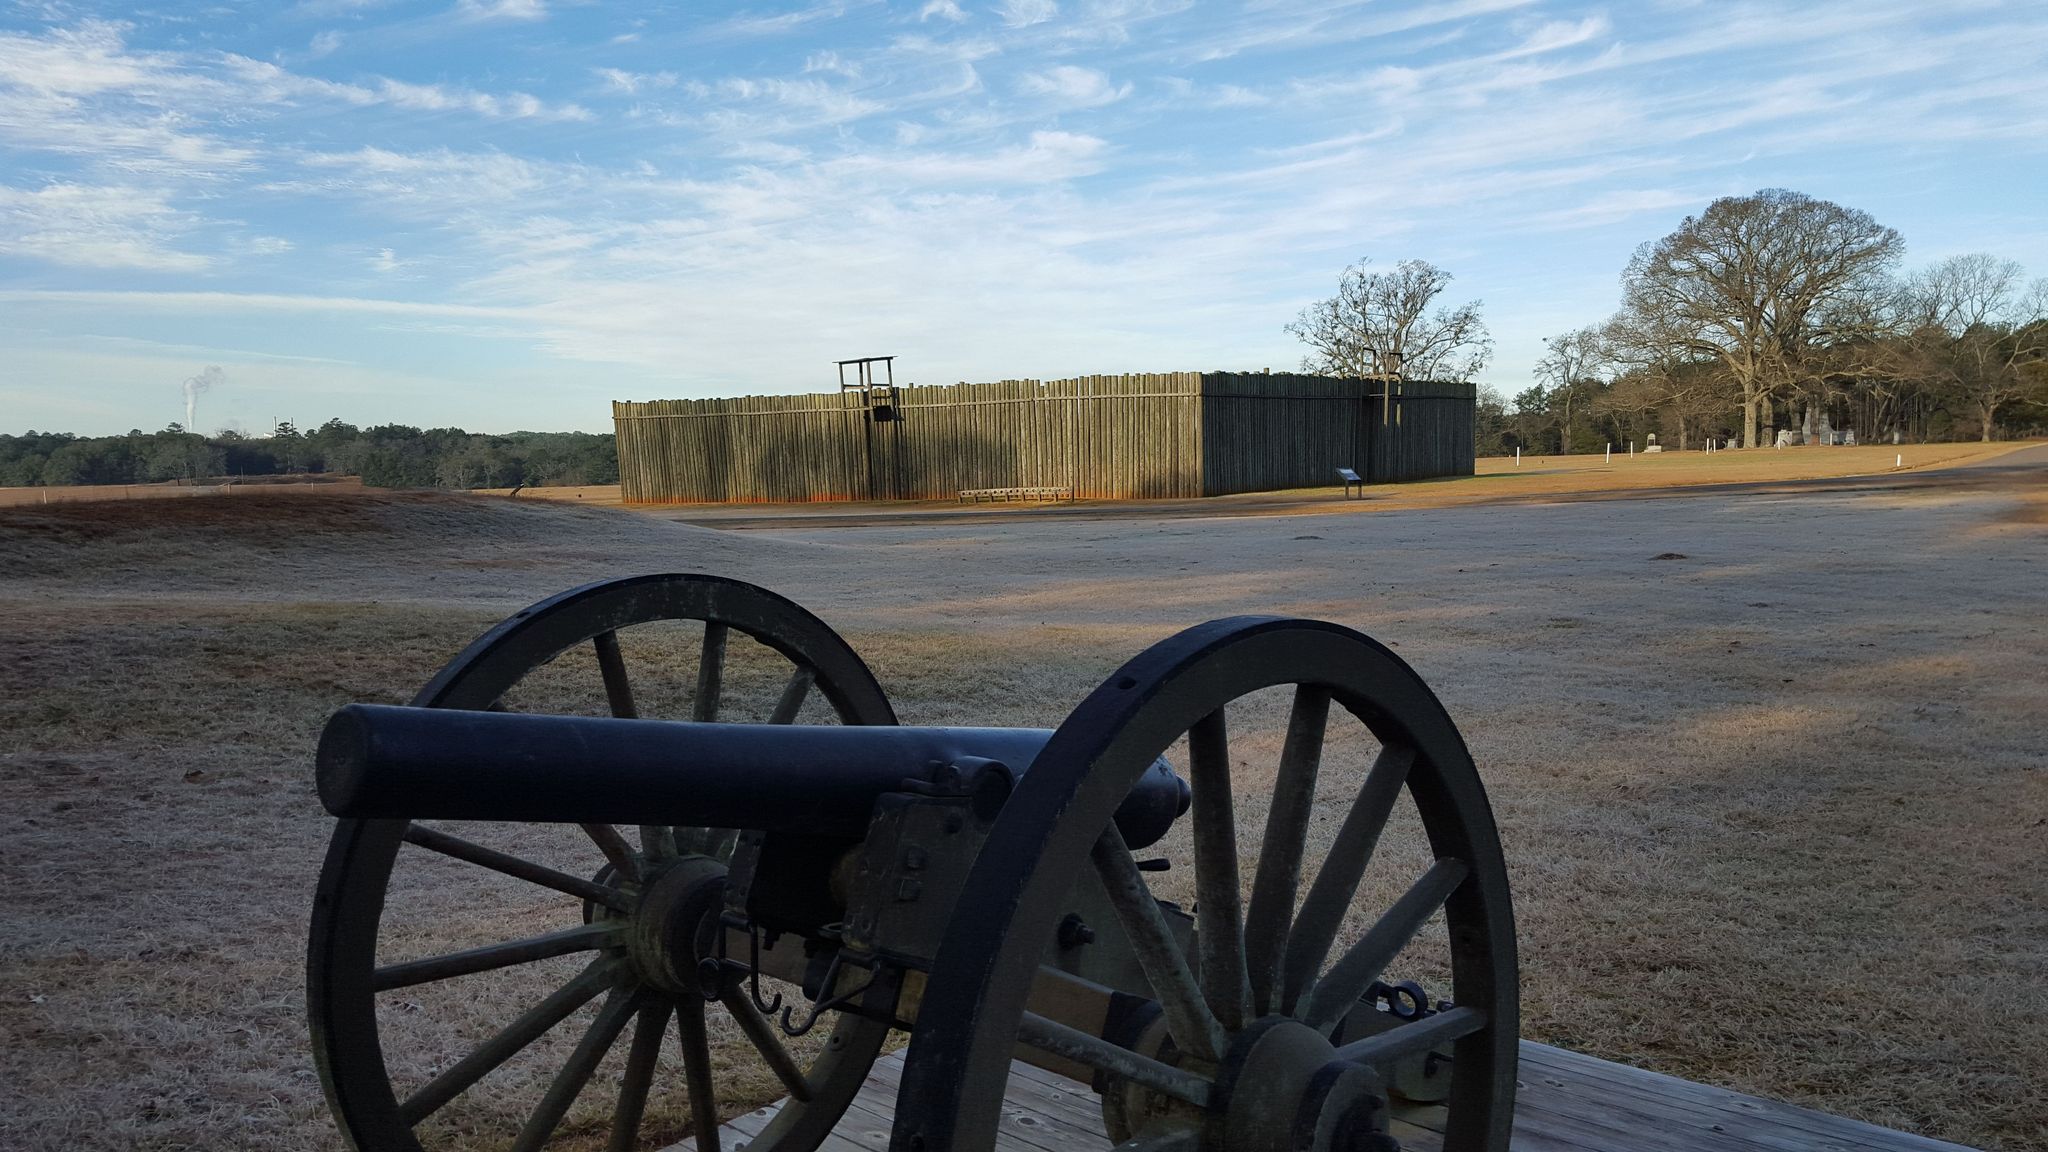 Camp Sumter Military Prison, known as Andersonville, was the deadliest ground of the Civil War. Nearly 13,000 American soldiers died here.